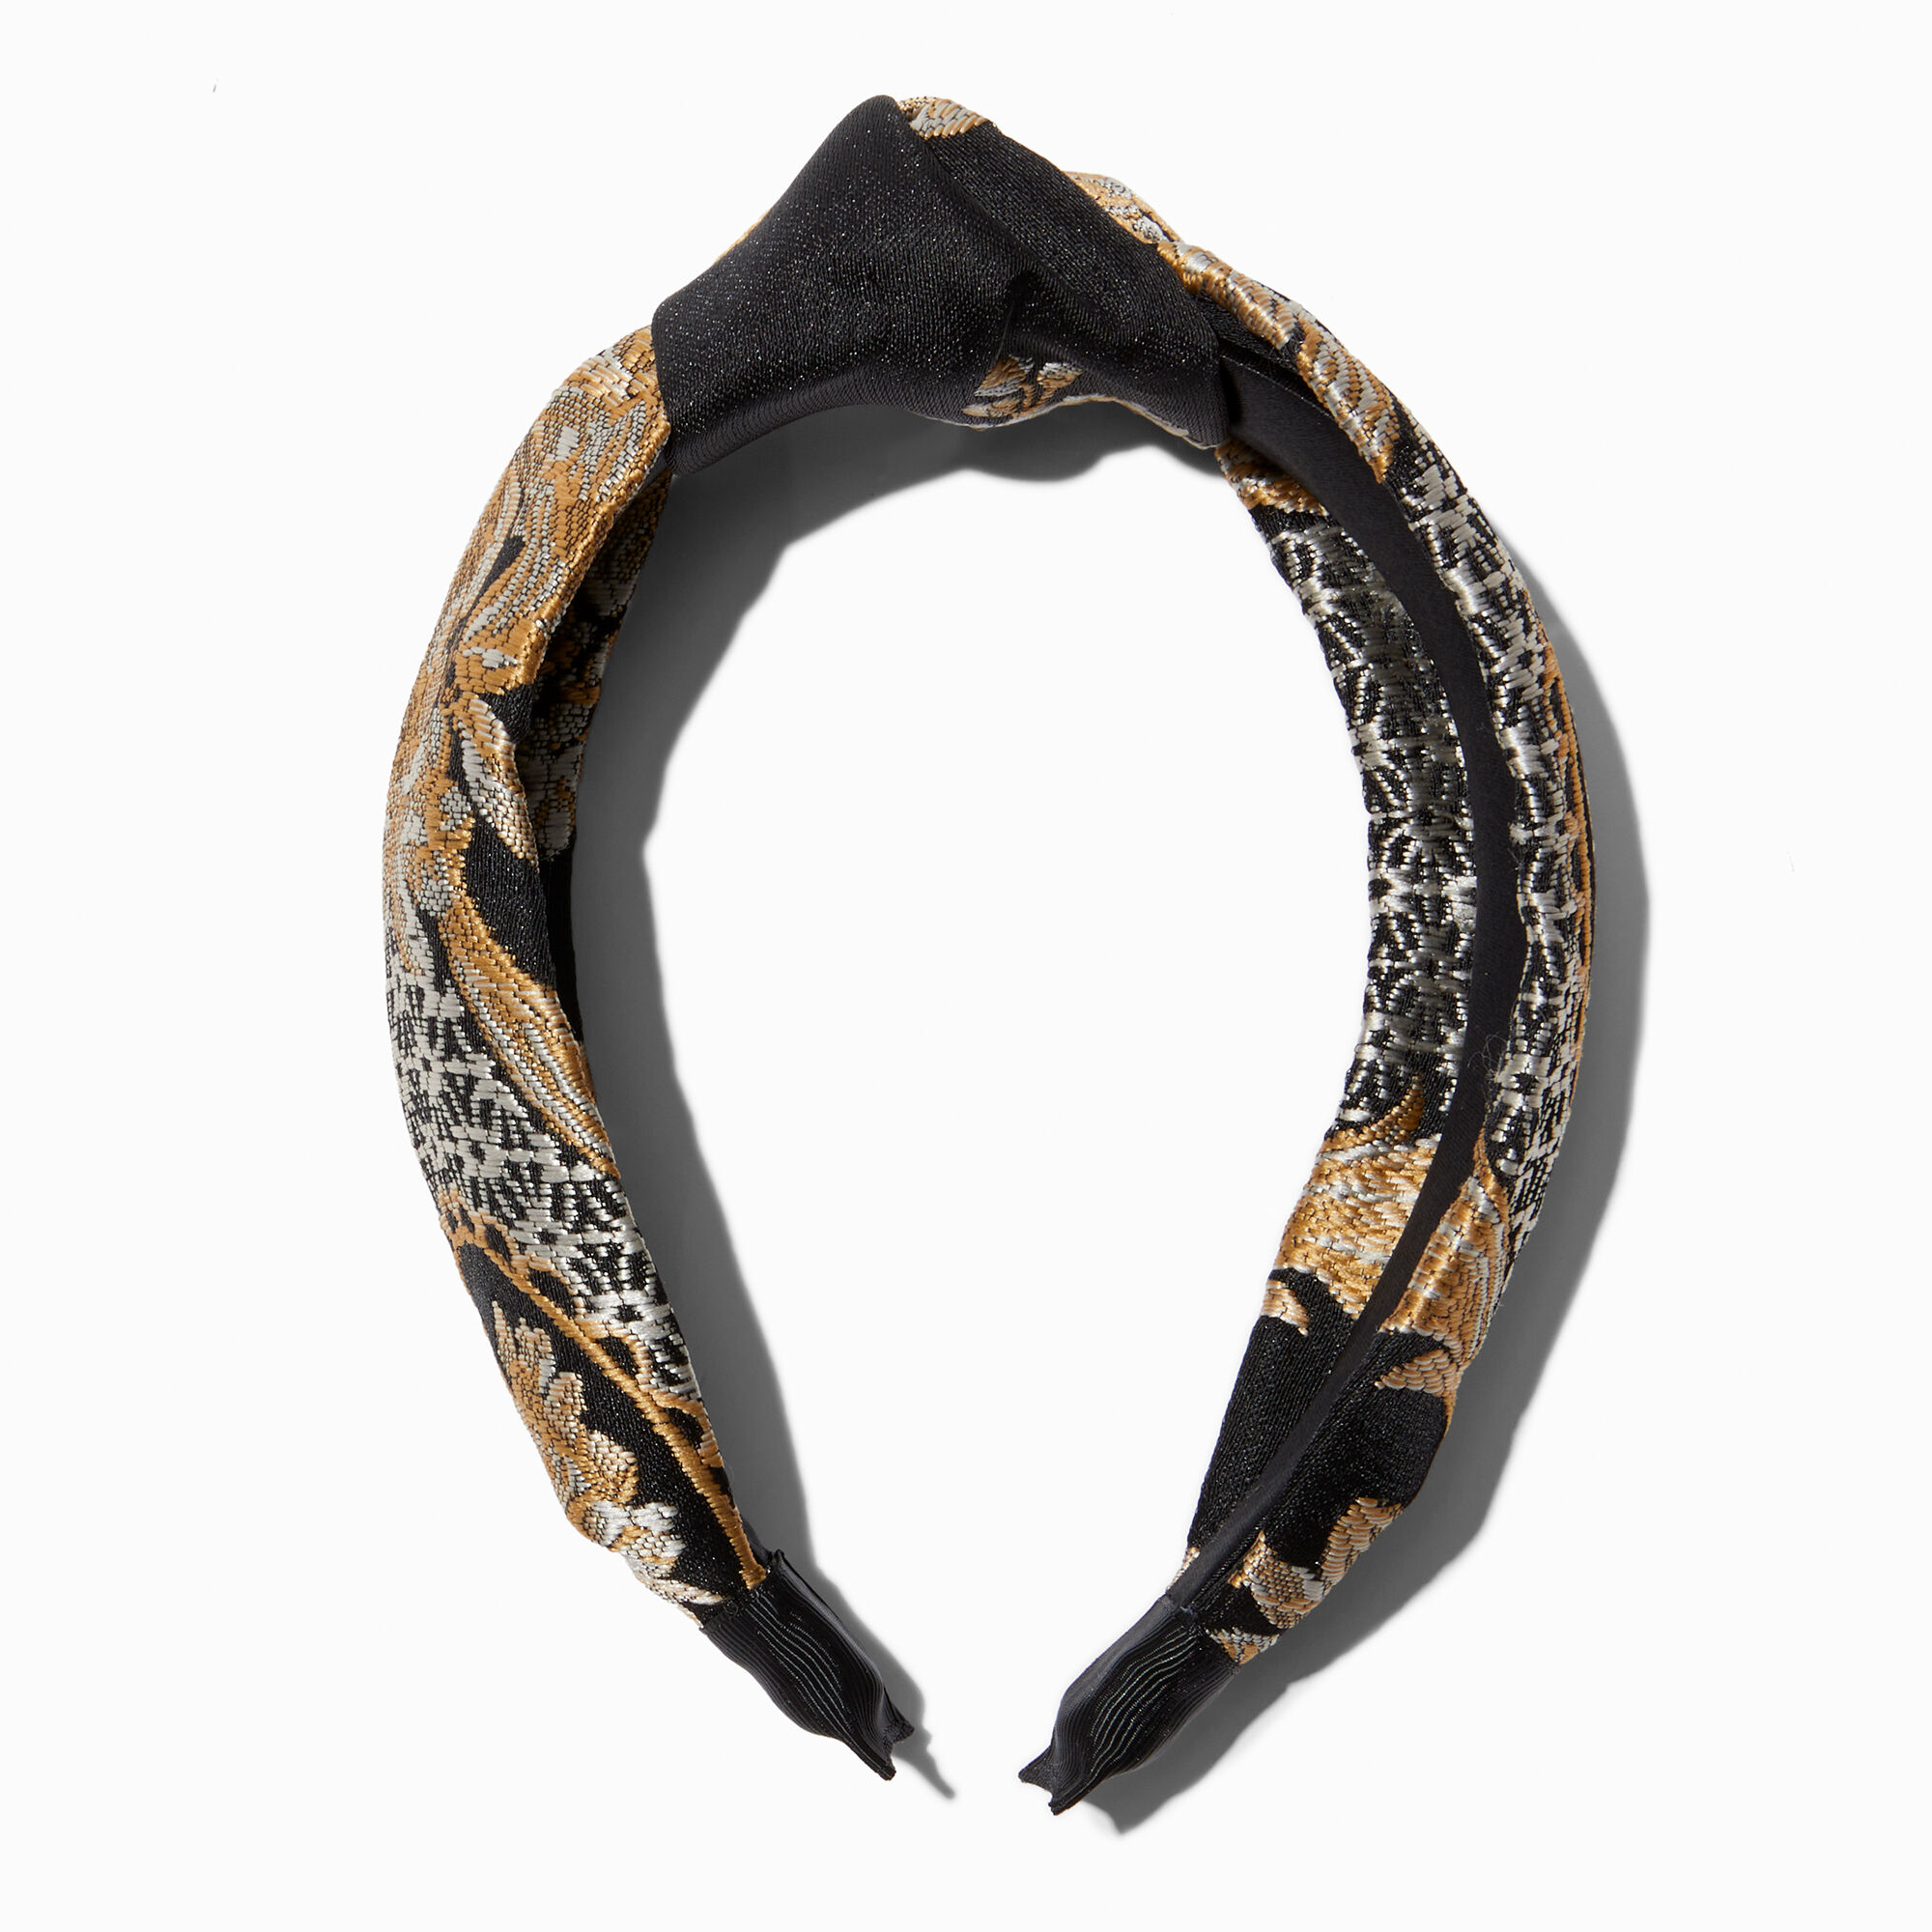 View Claires Gold Floral Brocade Knotted Headband Black information